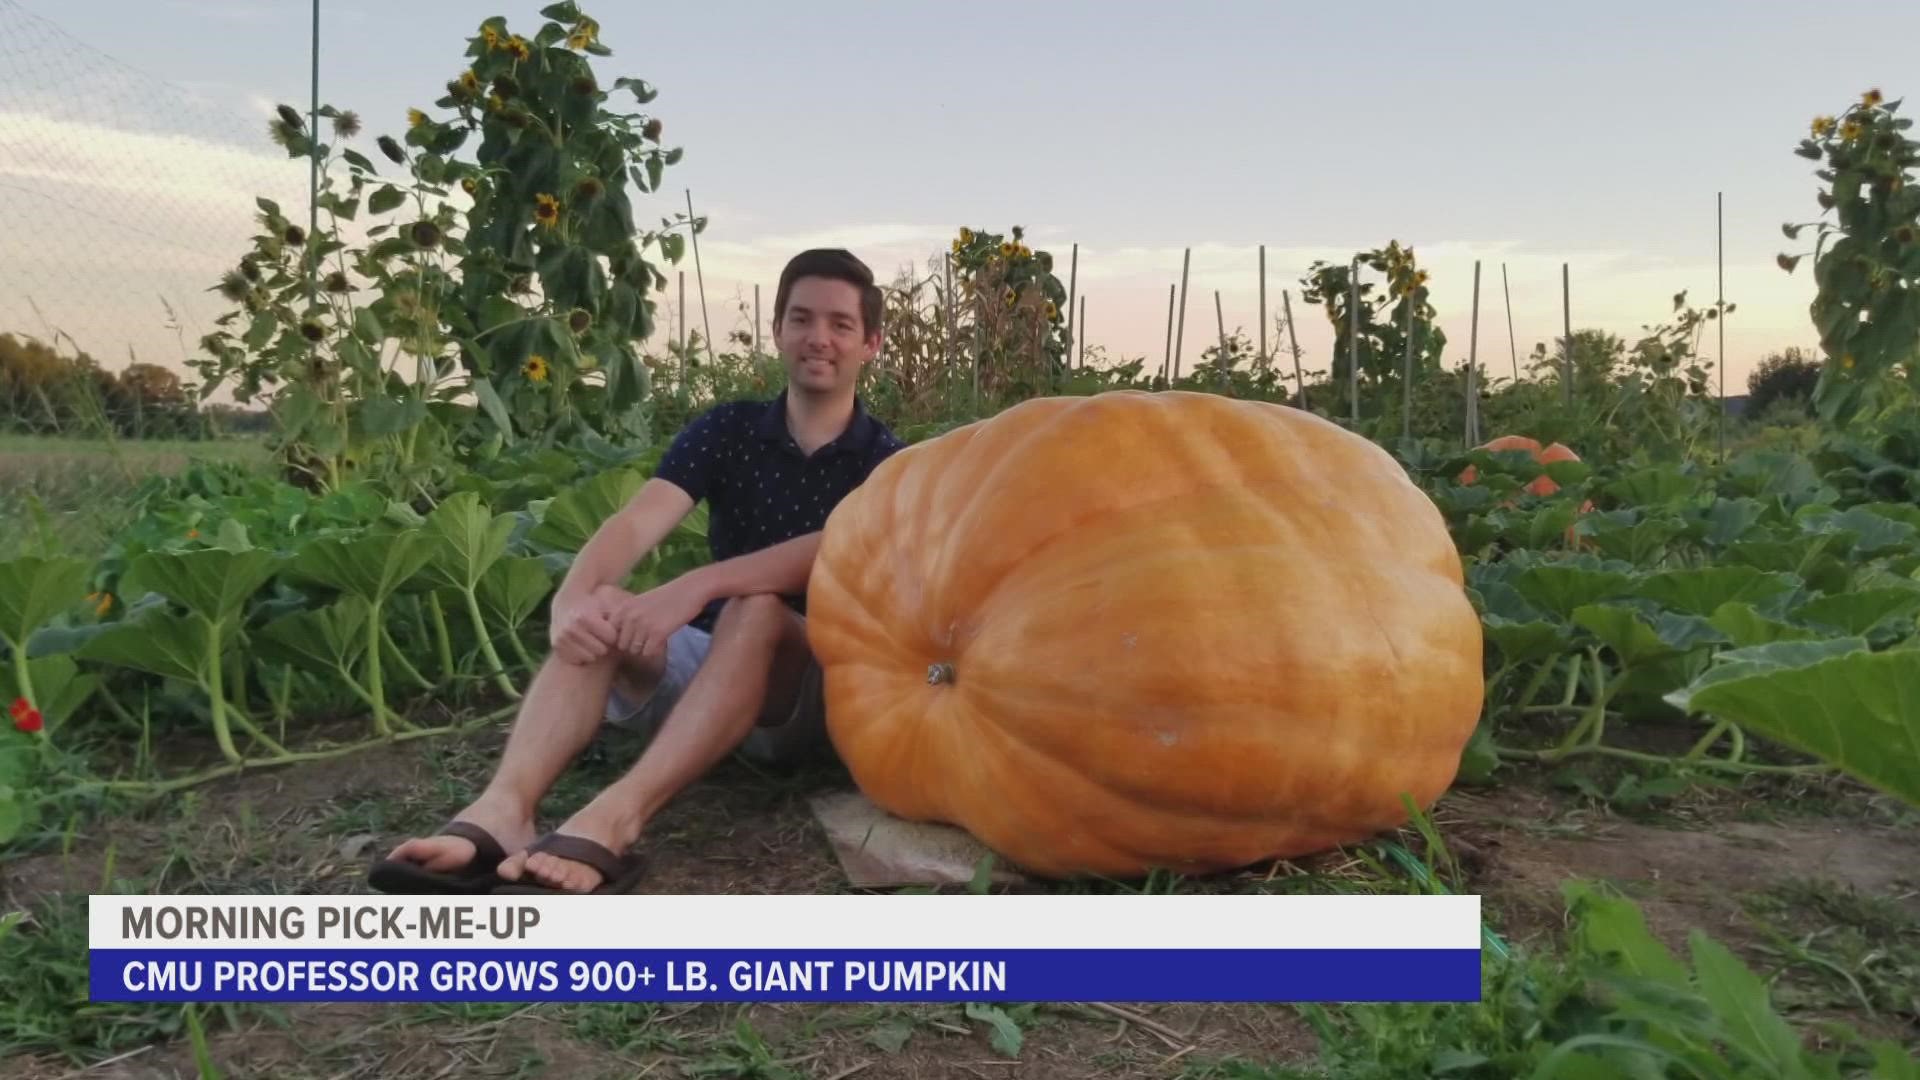 Dr. Jason Keeler has been growing pumpkins since the early '90s—and this year, he grew his biggest pumpkin yet.